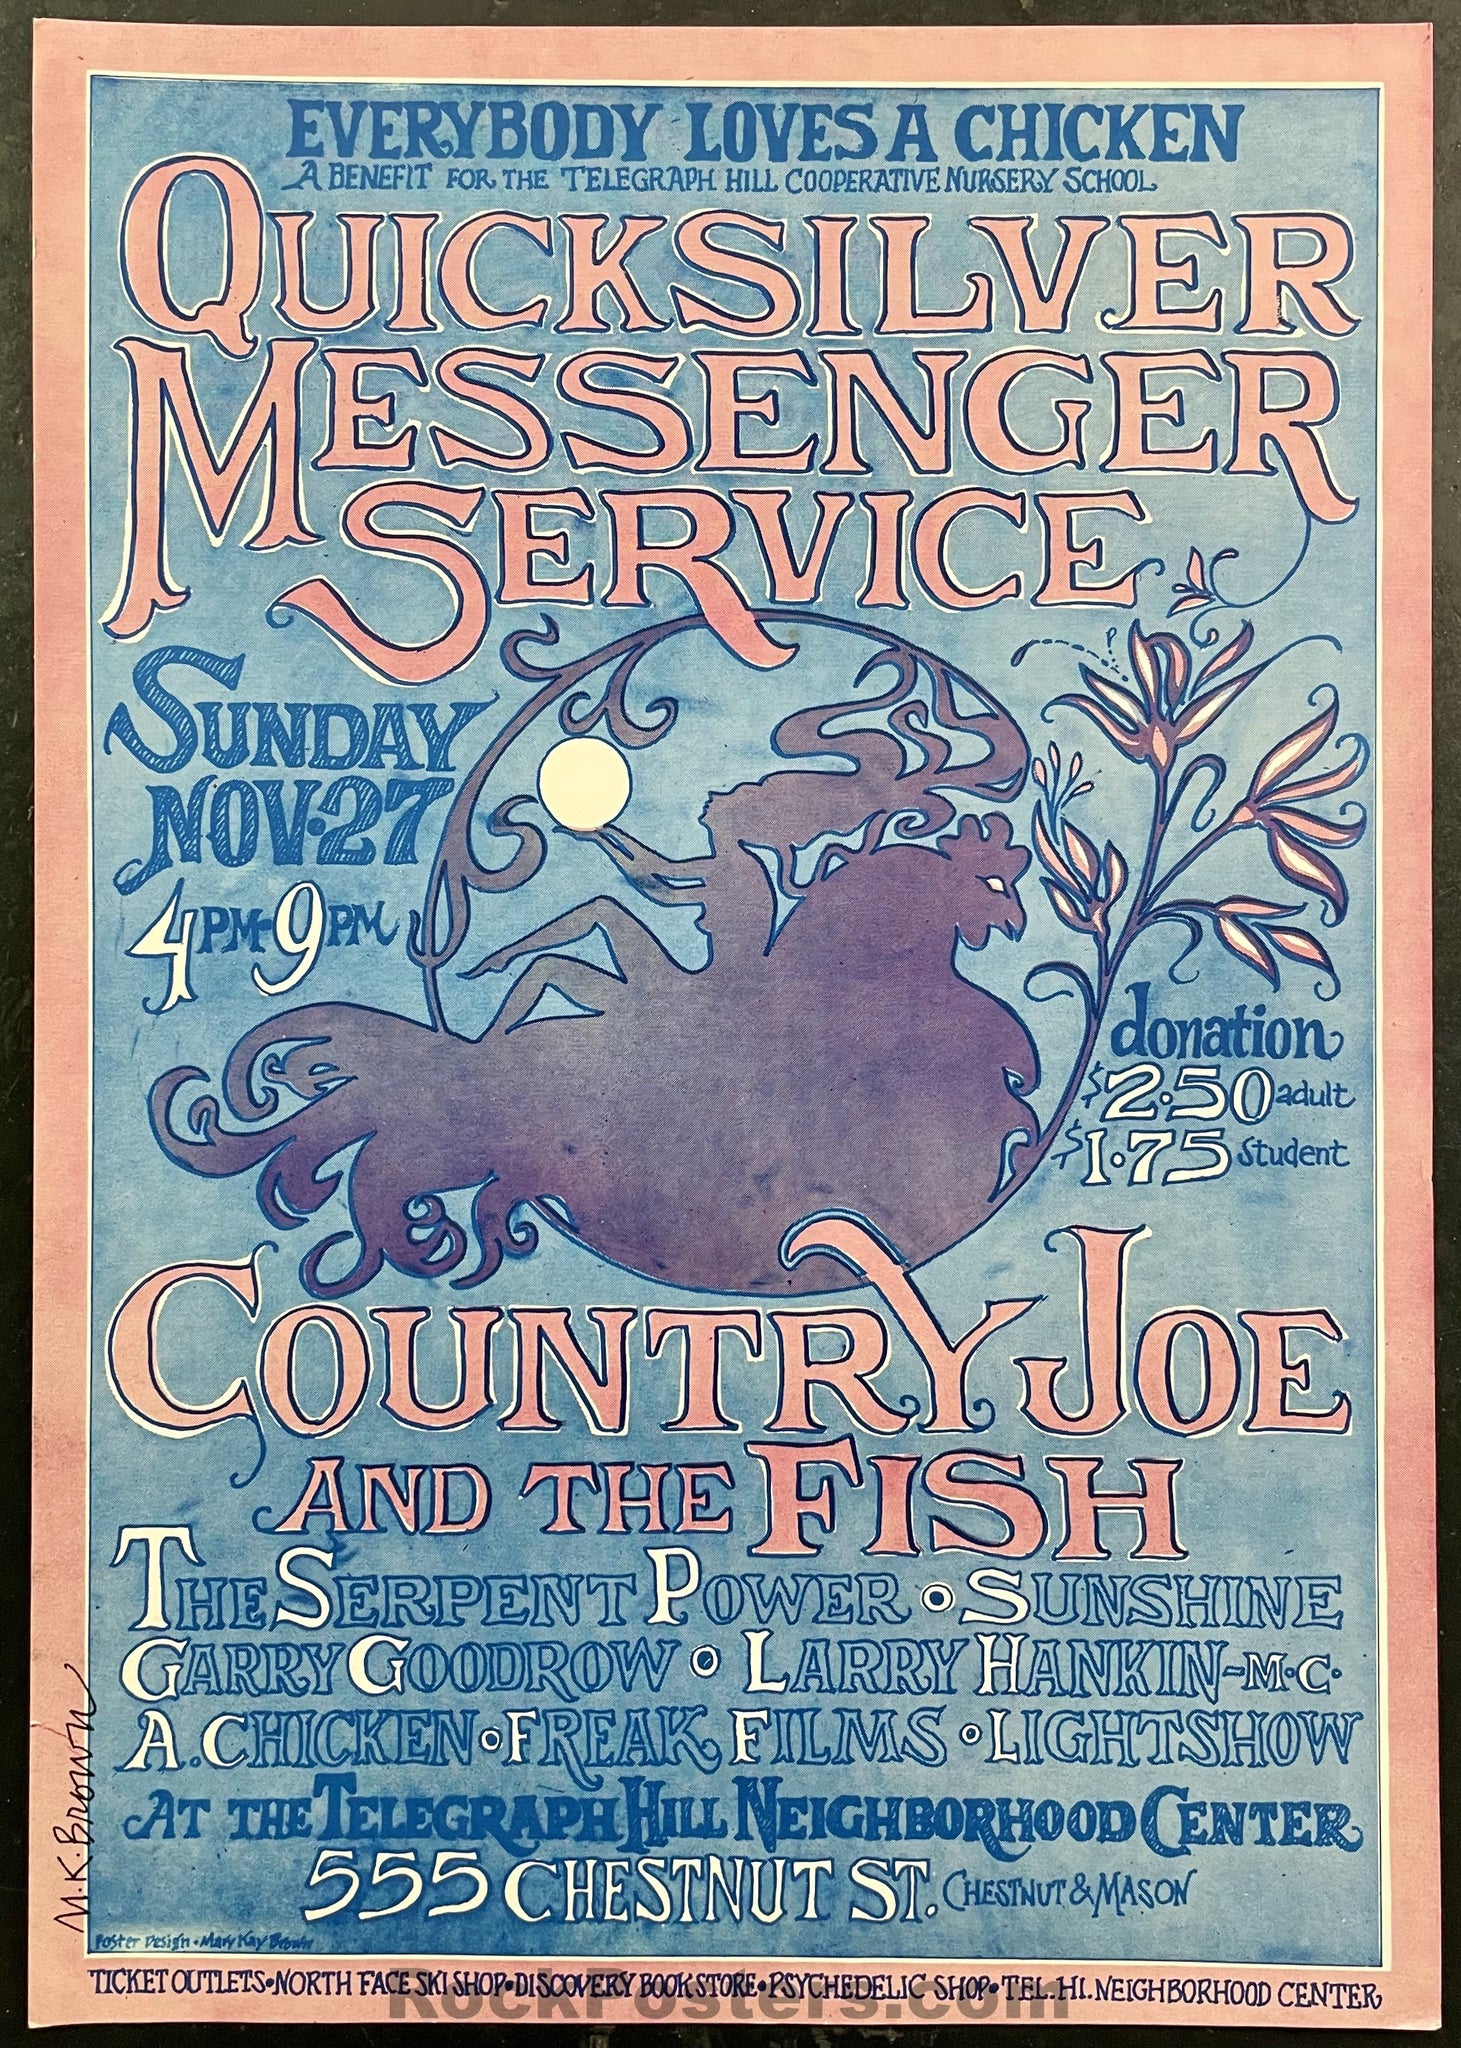 AUCTION - QuicksIlver Messenger  - Mary Kay Brown Signed - 1968 Benefit Poster - San Francisco - Excellent